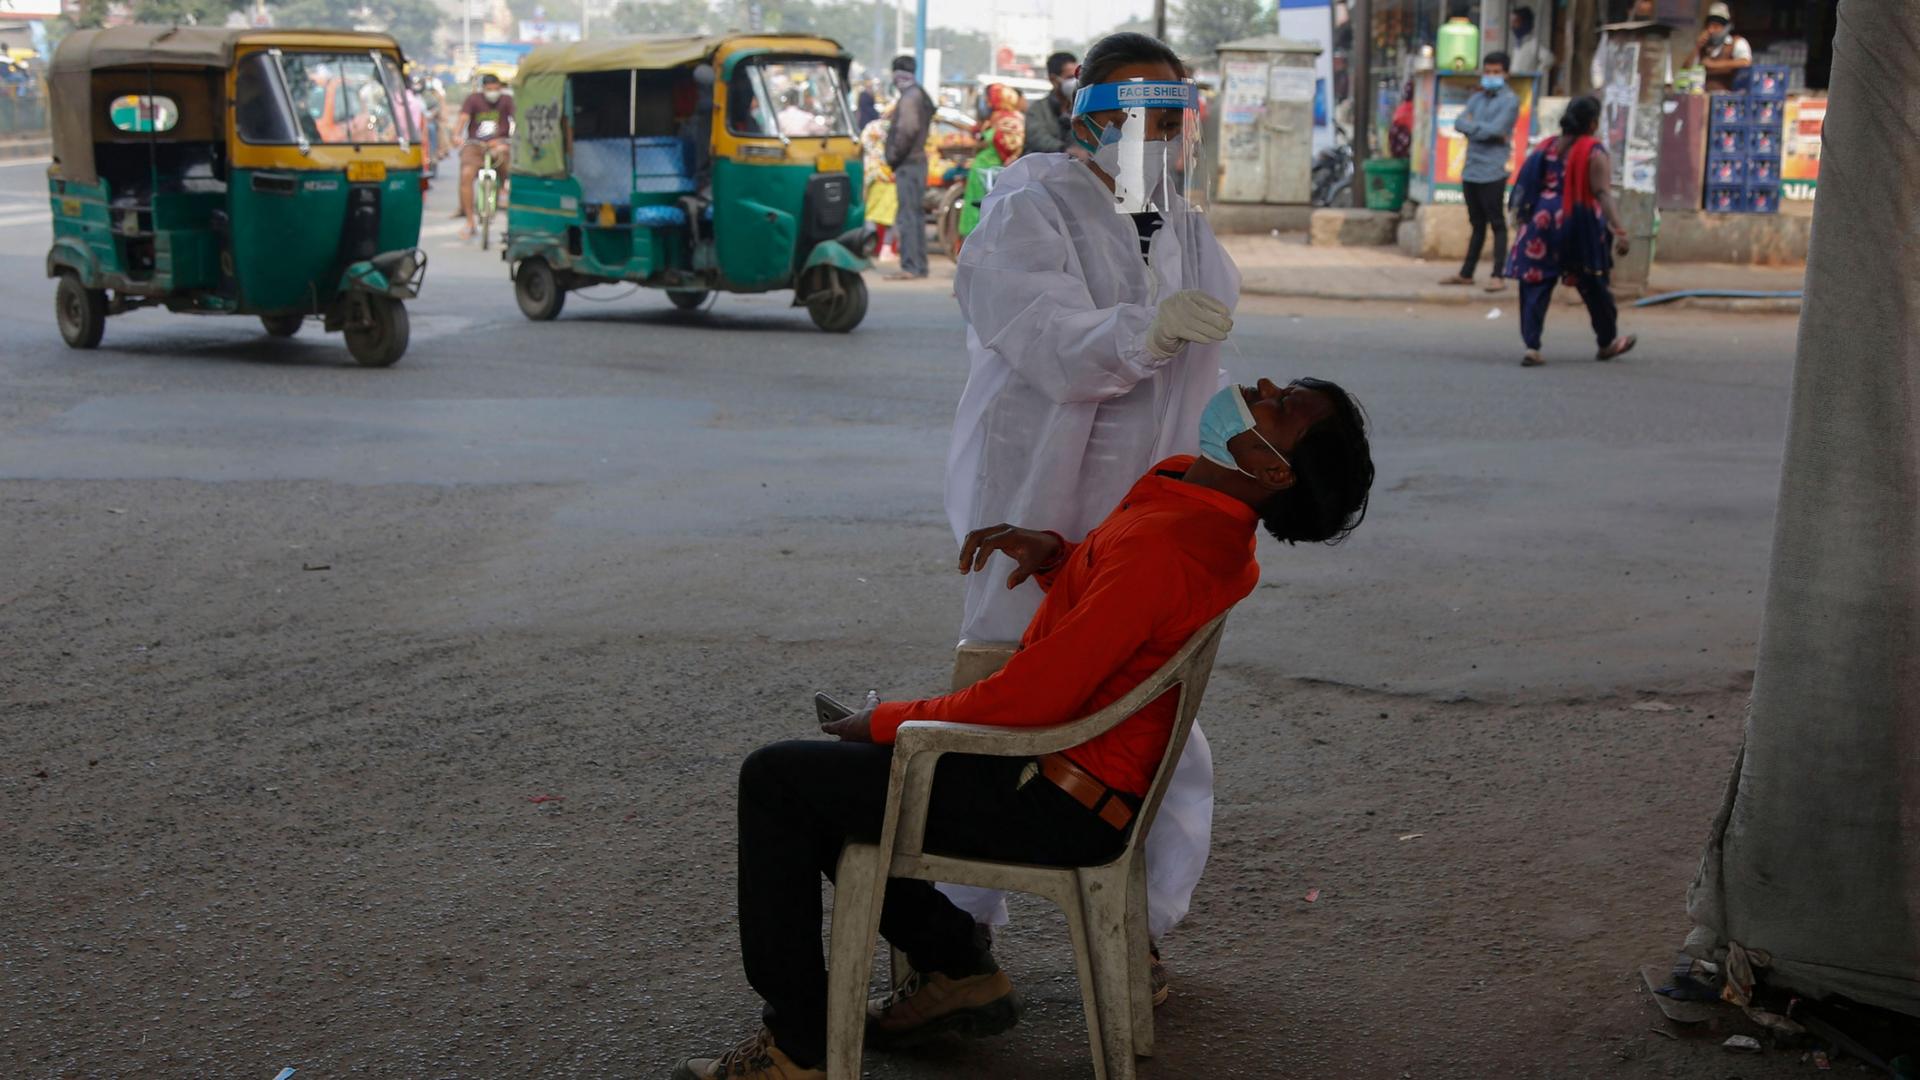 A man is shown sitting with his head back and a medical professional taking a nasal swab from his nose.